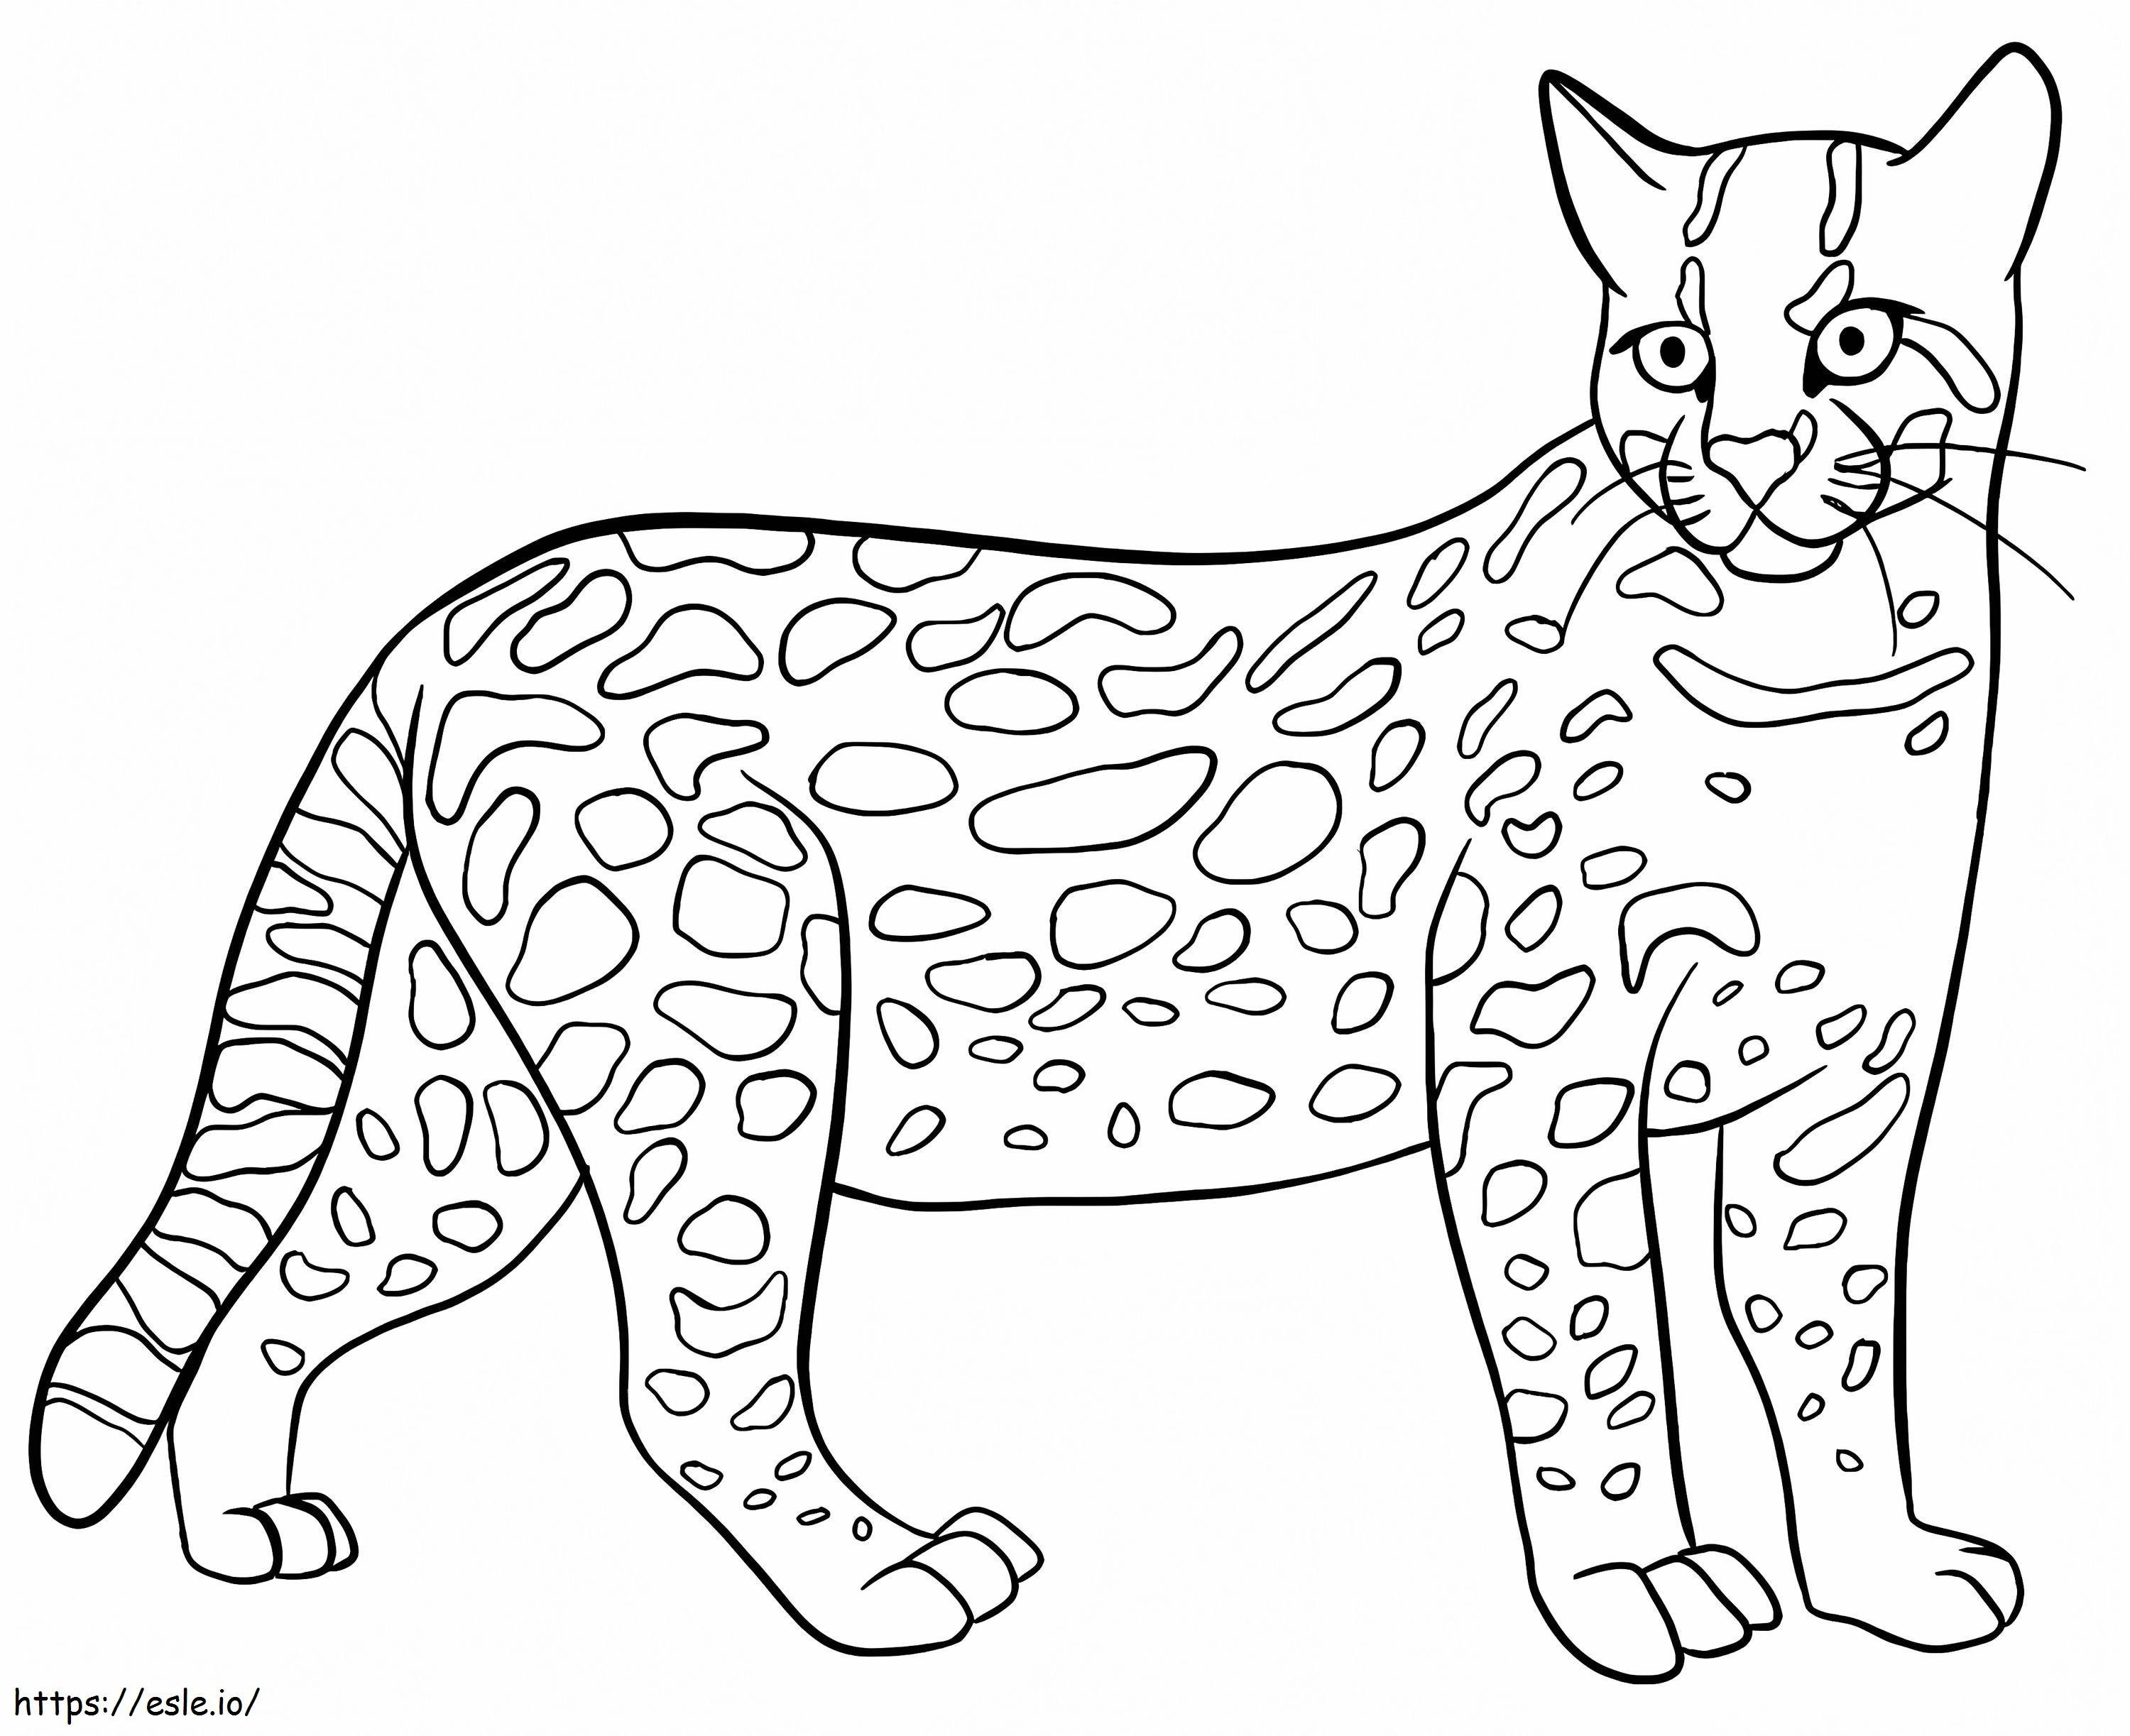 Ocelot wild cat coloring page